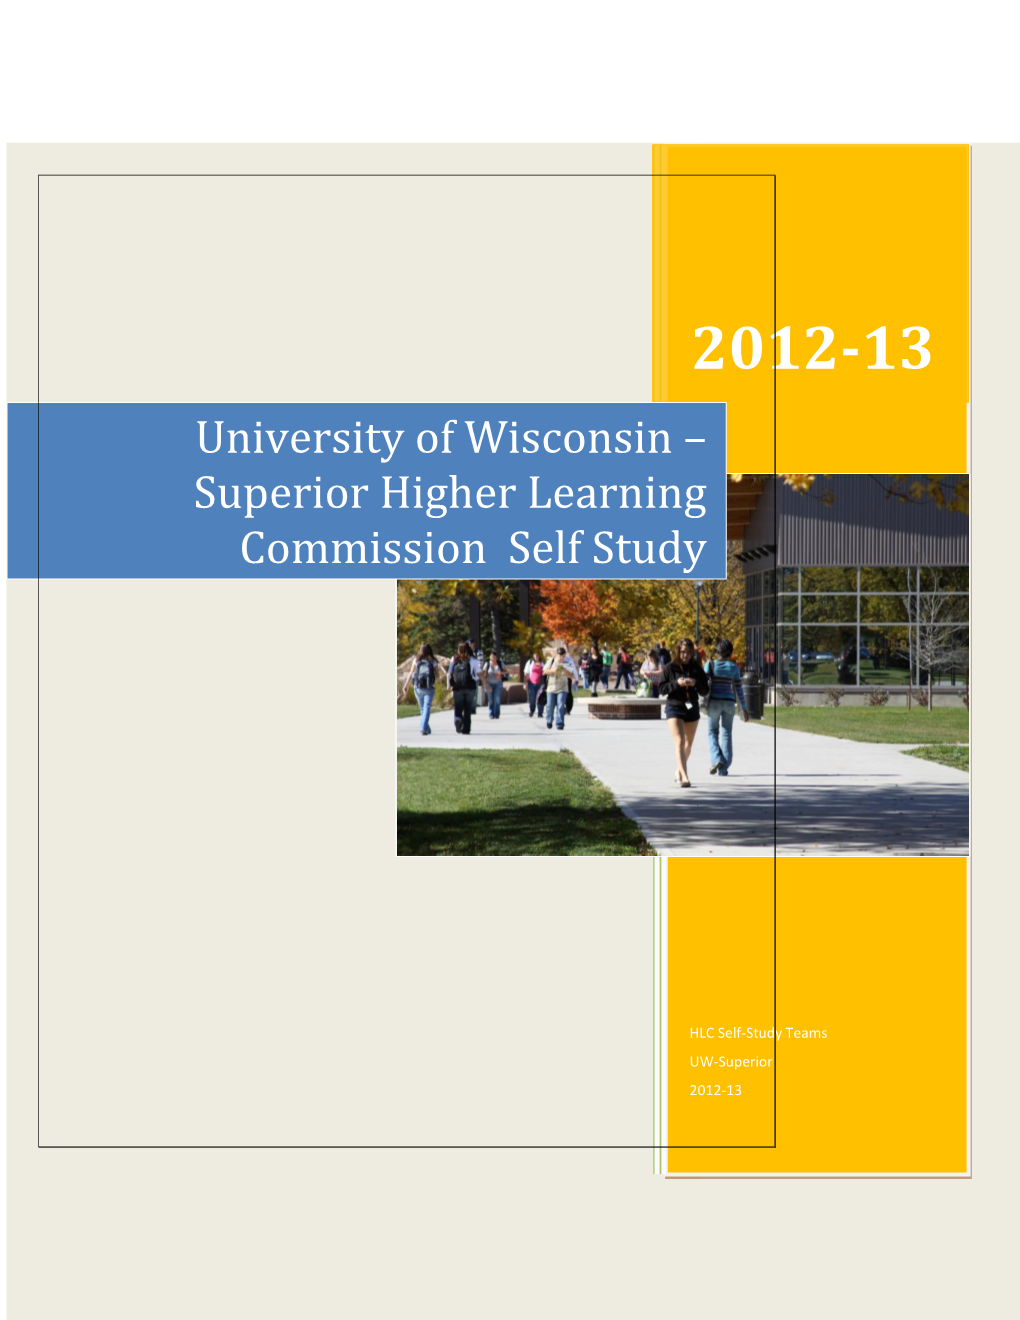 University of Wisconsin – Superior Higher Learning Commission Self Study